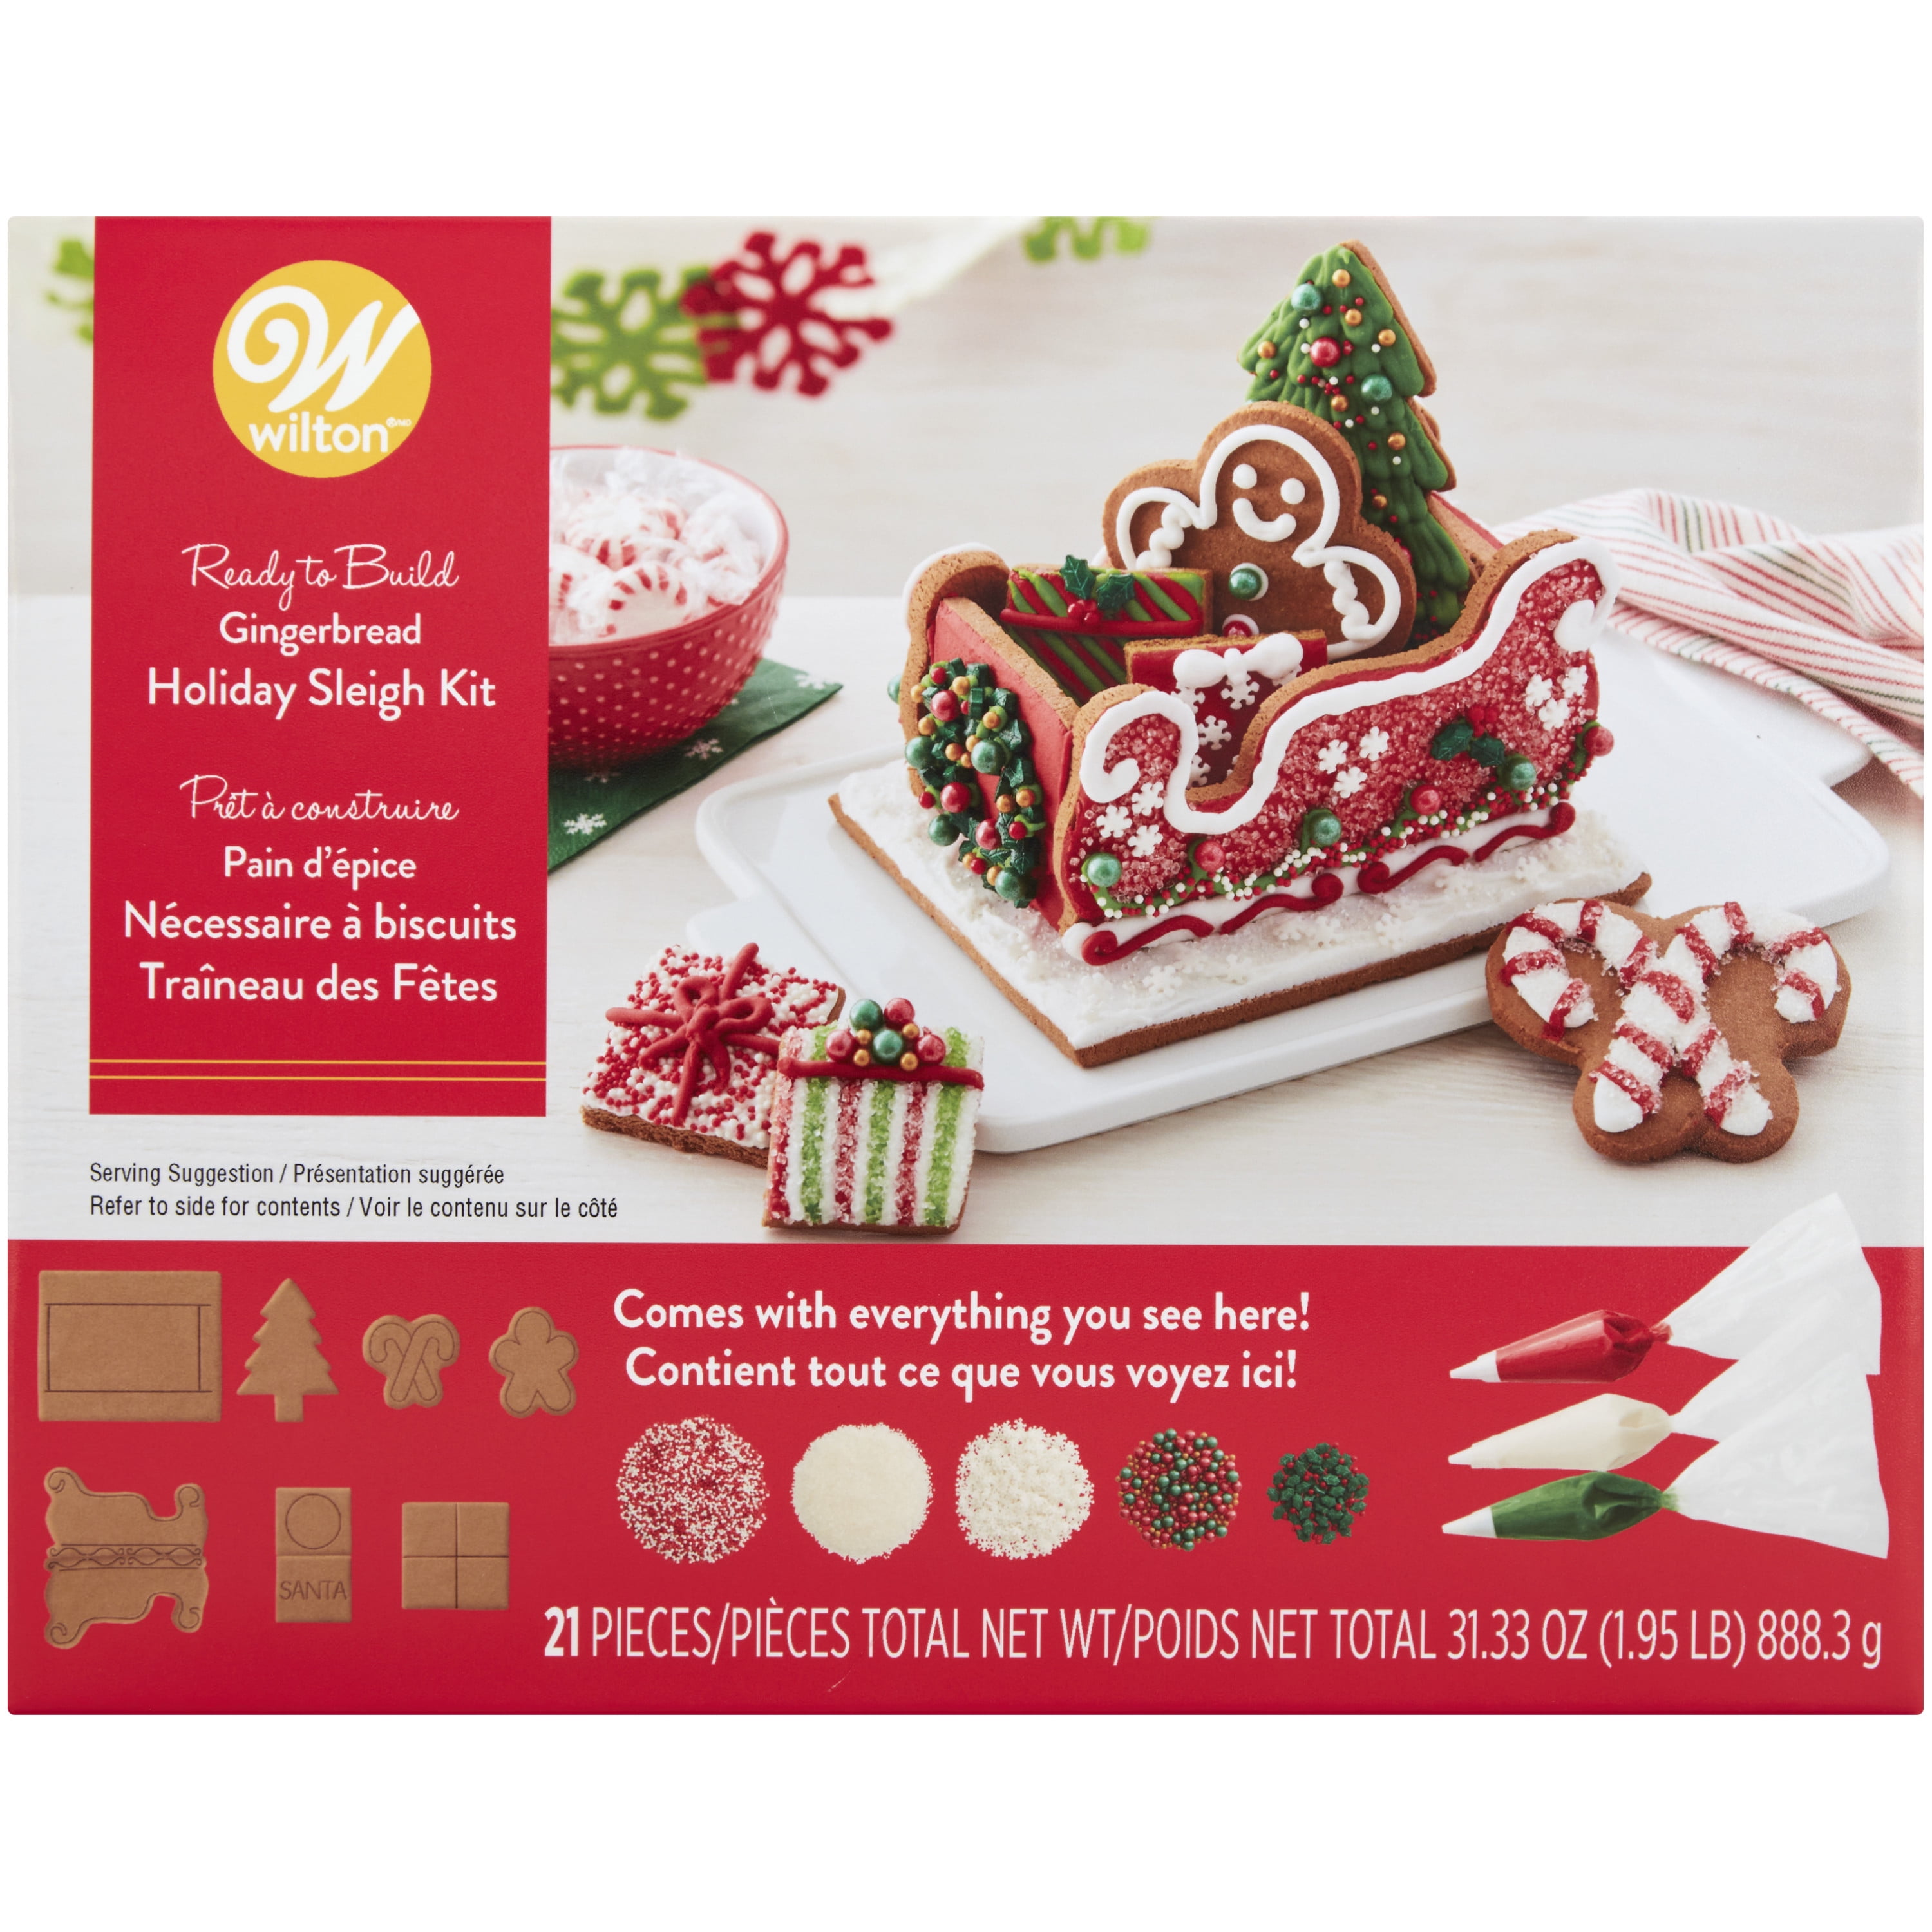 Wilton Ready to Build Gingerbread Holiday Sleigh Kit, 21-Piece